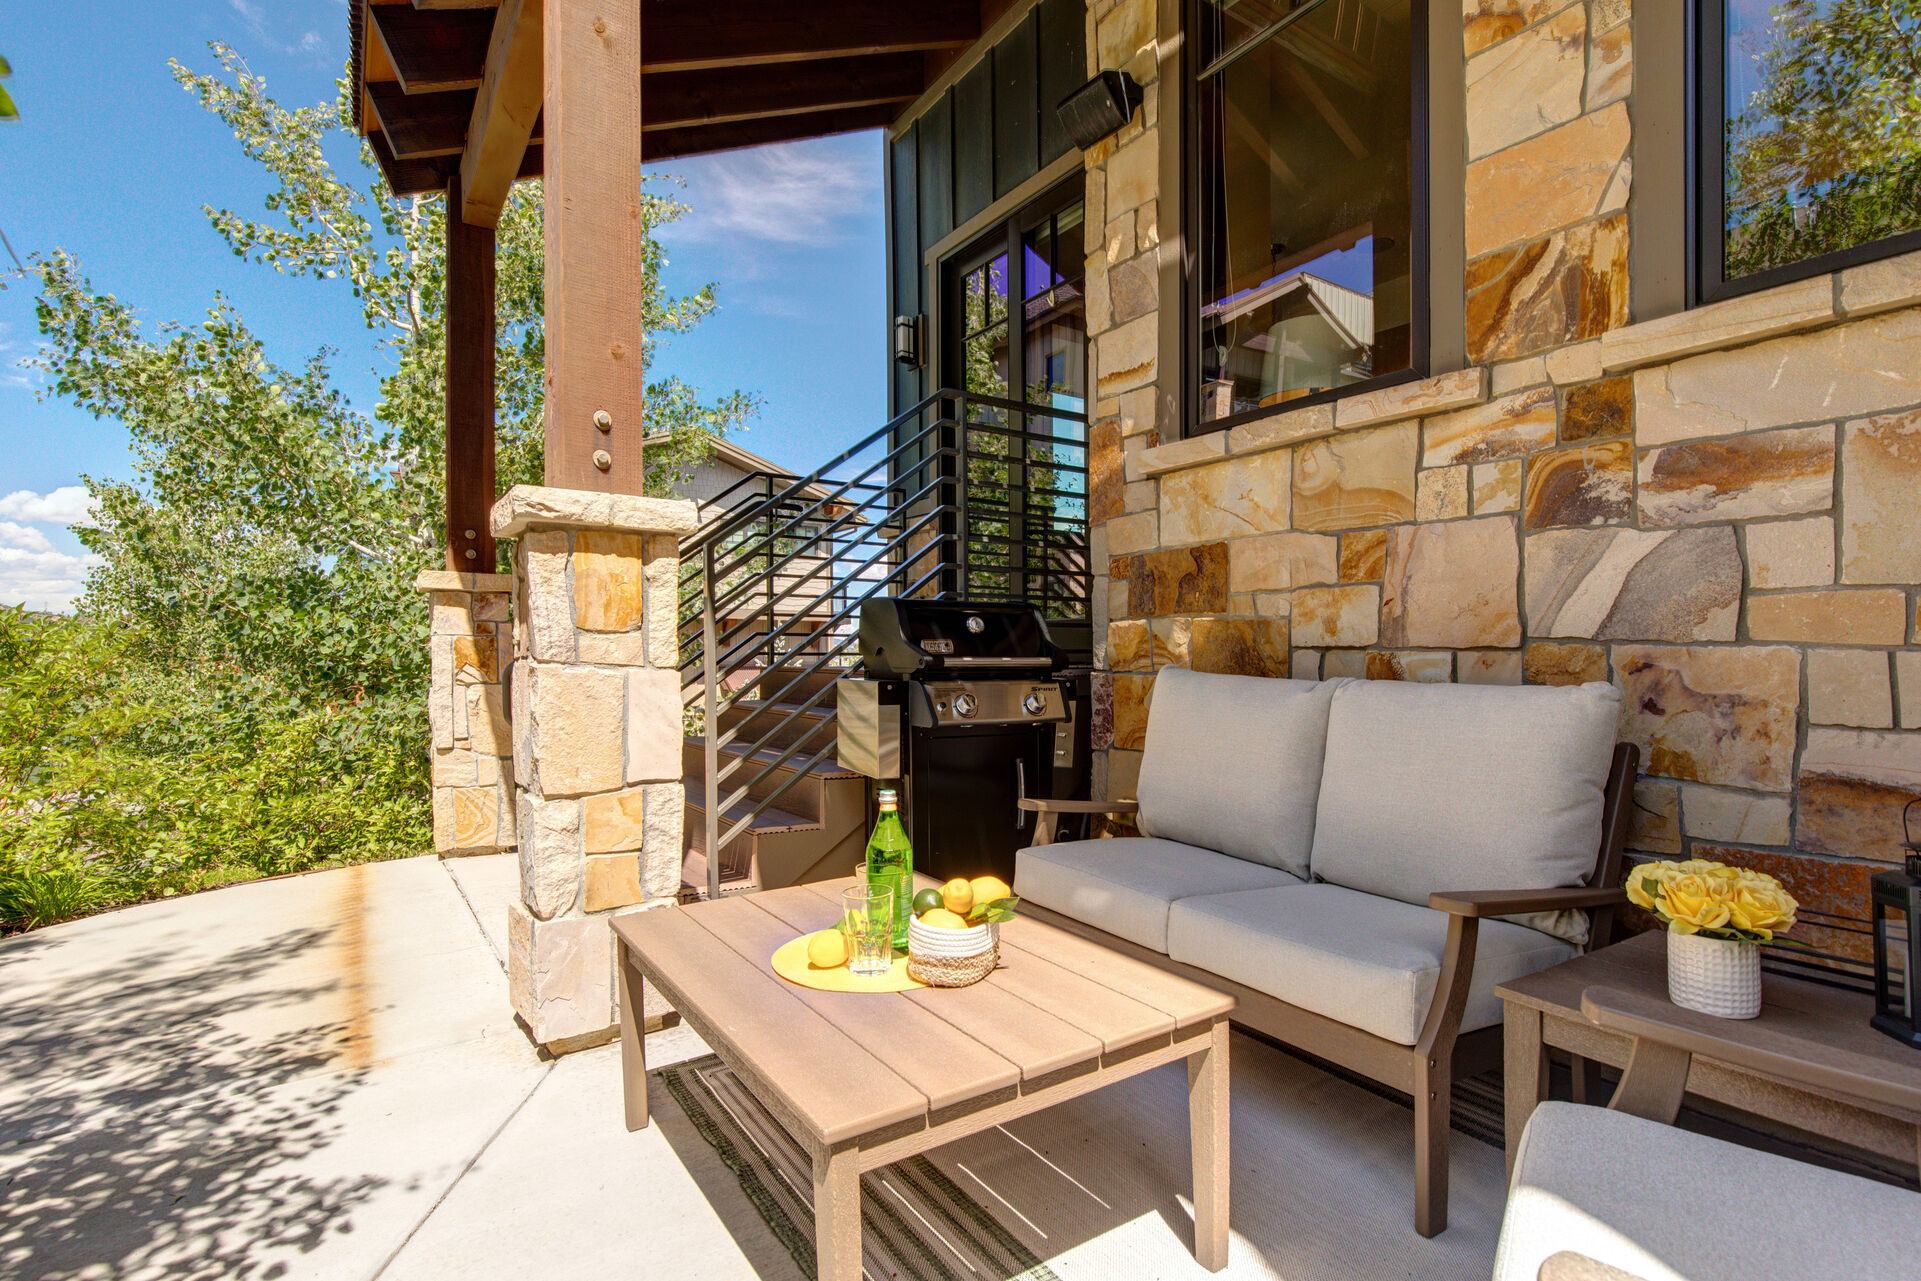 Private Patio with gas Weber grill and beautiful outdoor furnishings